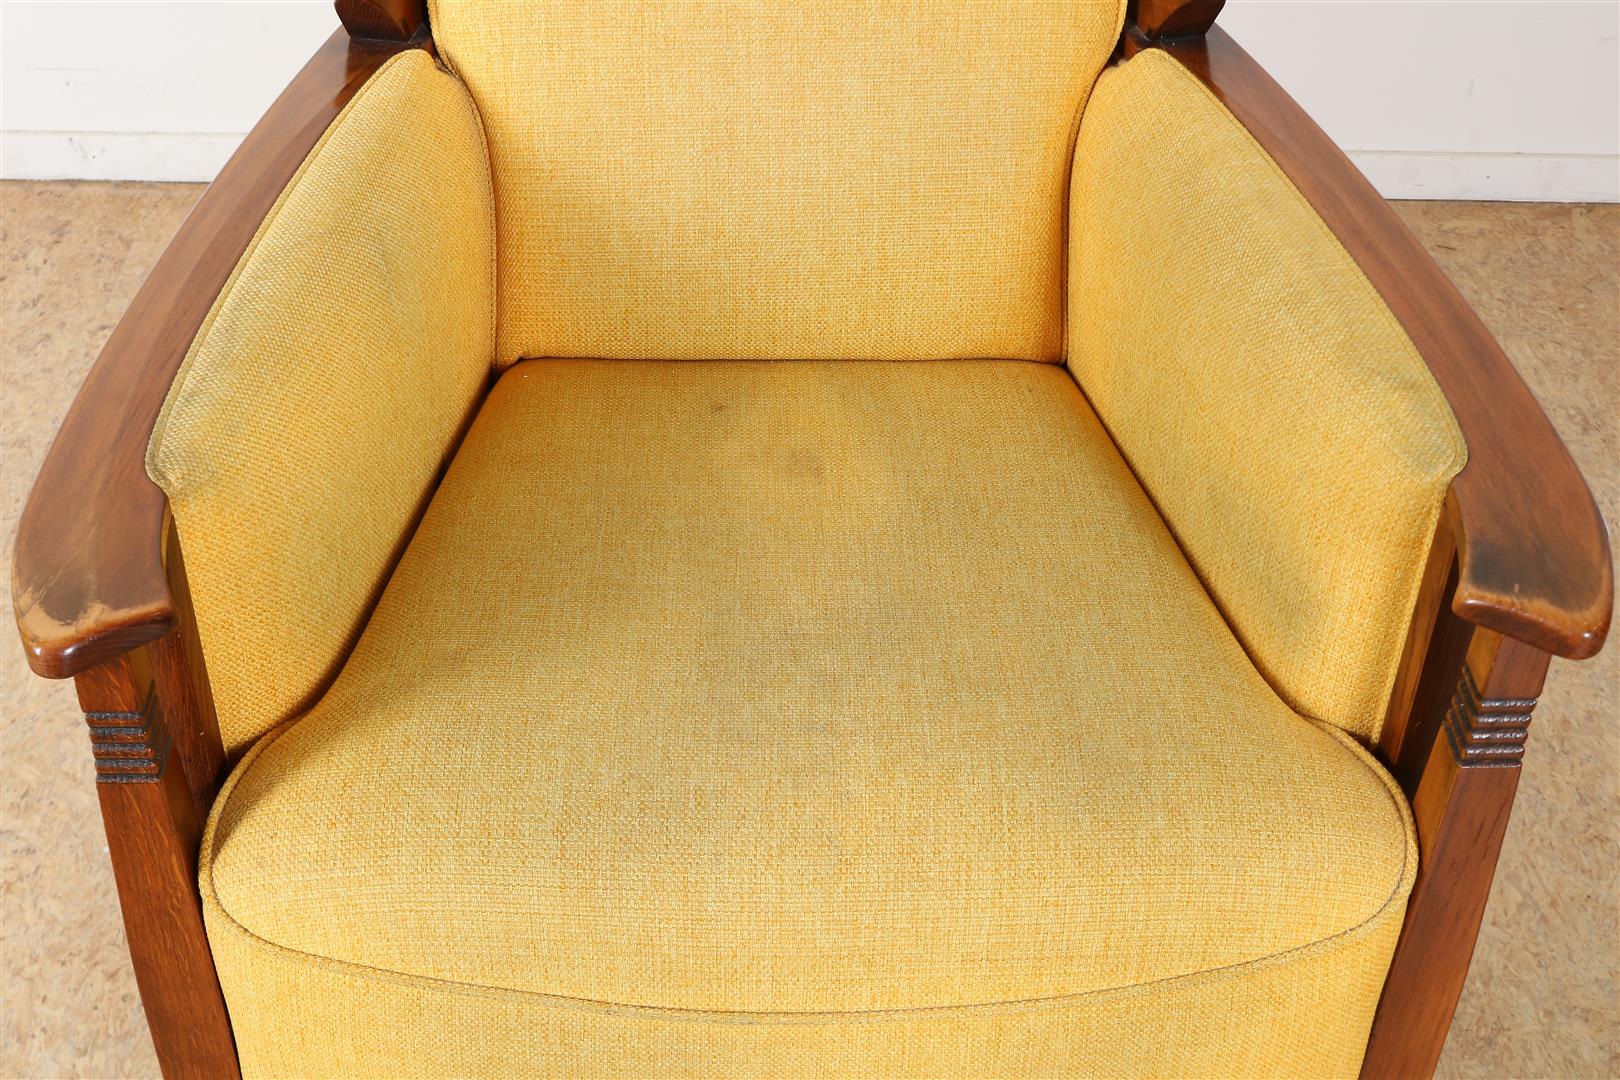 Oak Schuitema armchair with ocher yellow fabric upholstery (signs of use) - Image 3 of 5